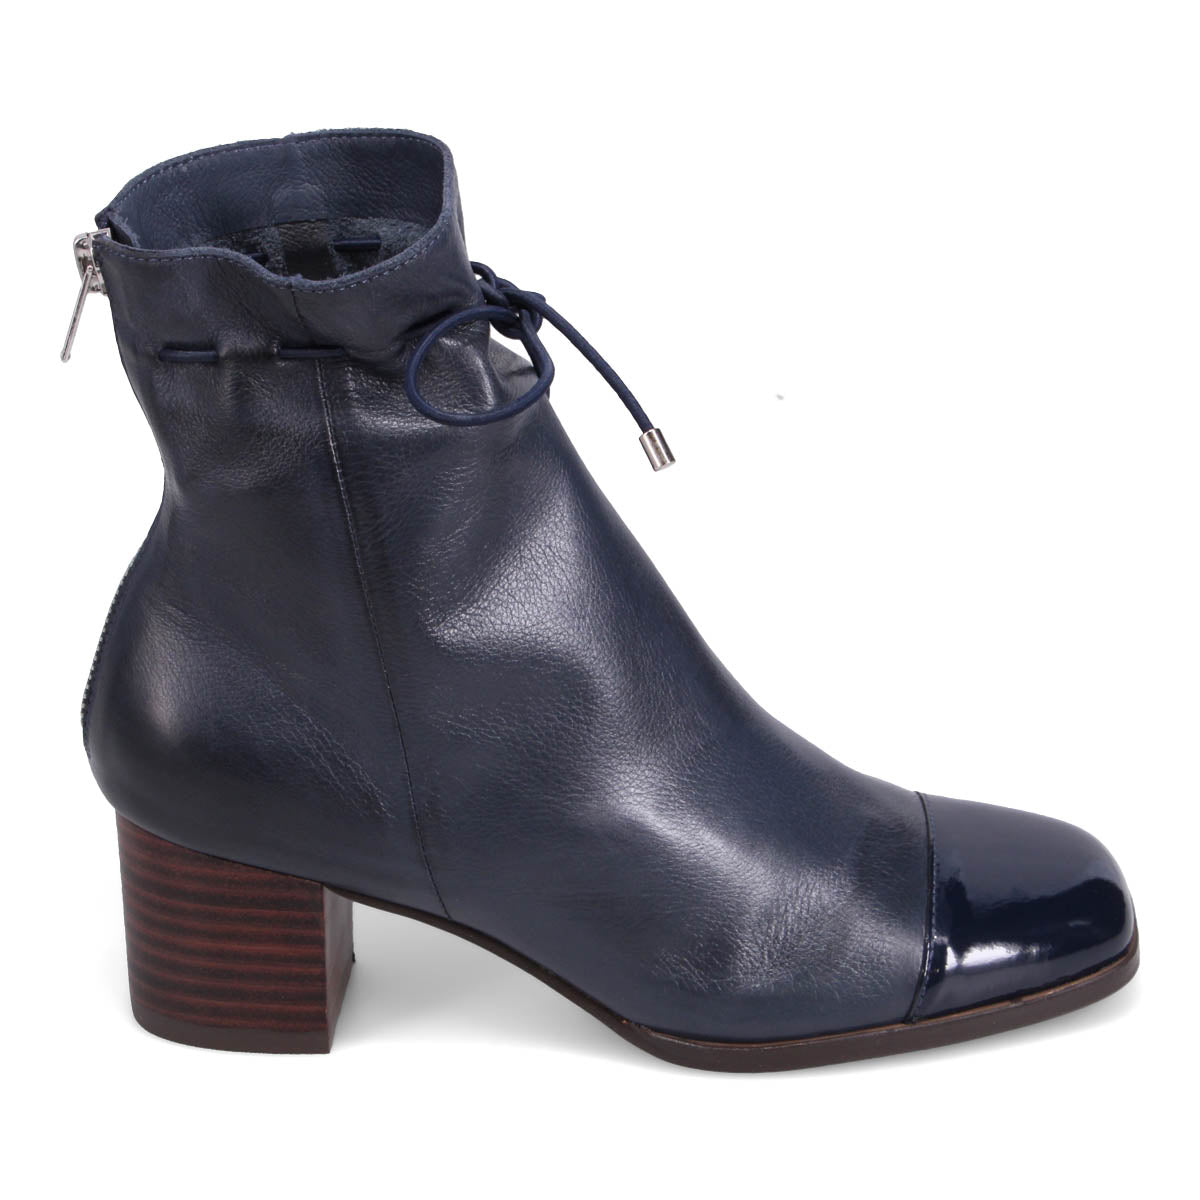 NAVY PATENT/LEATHER | Right